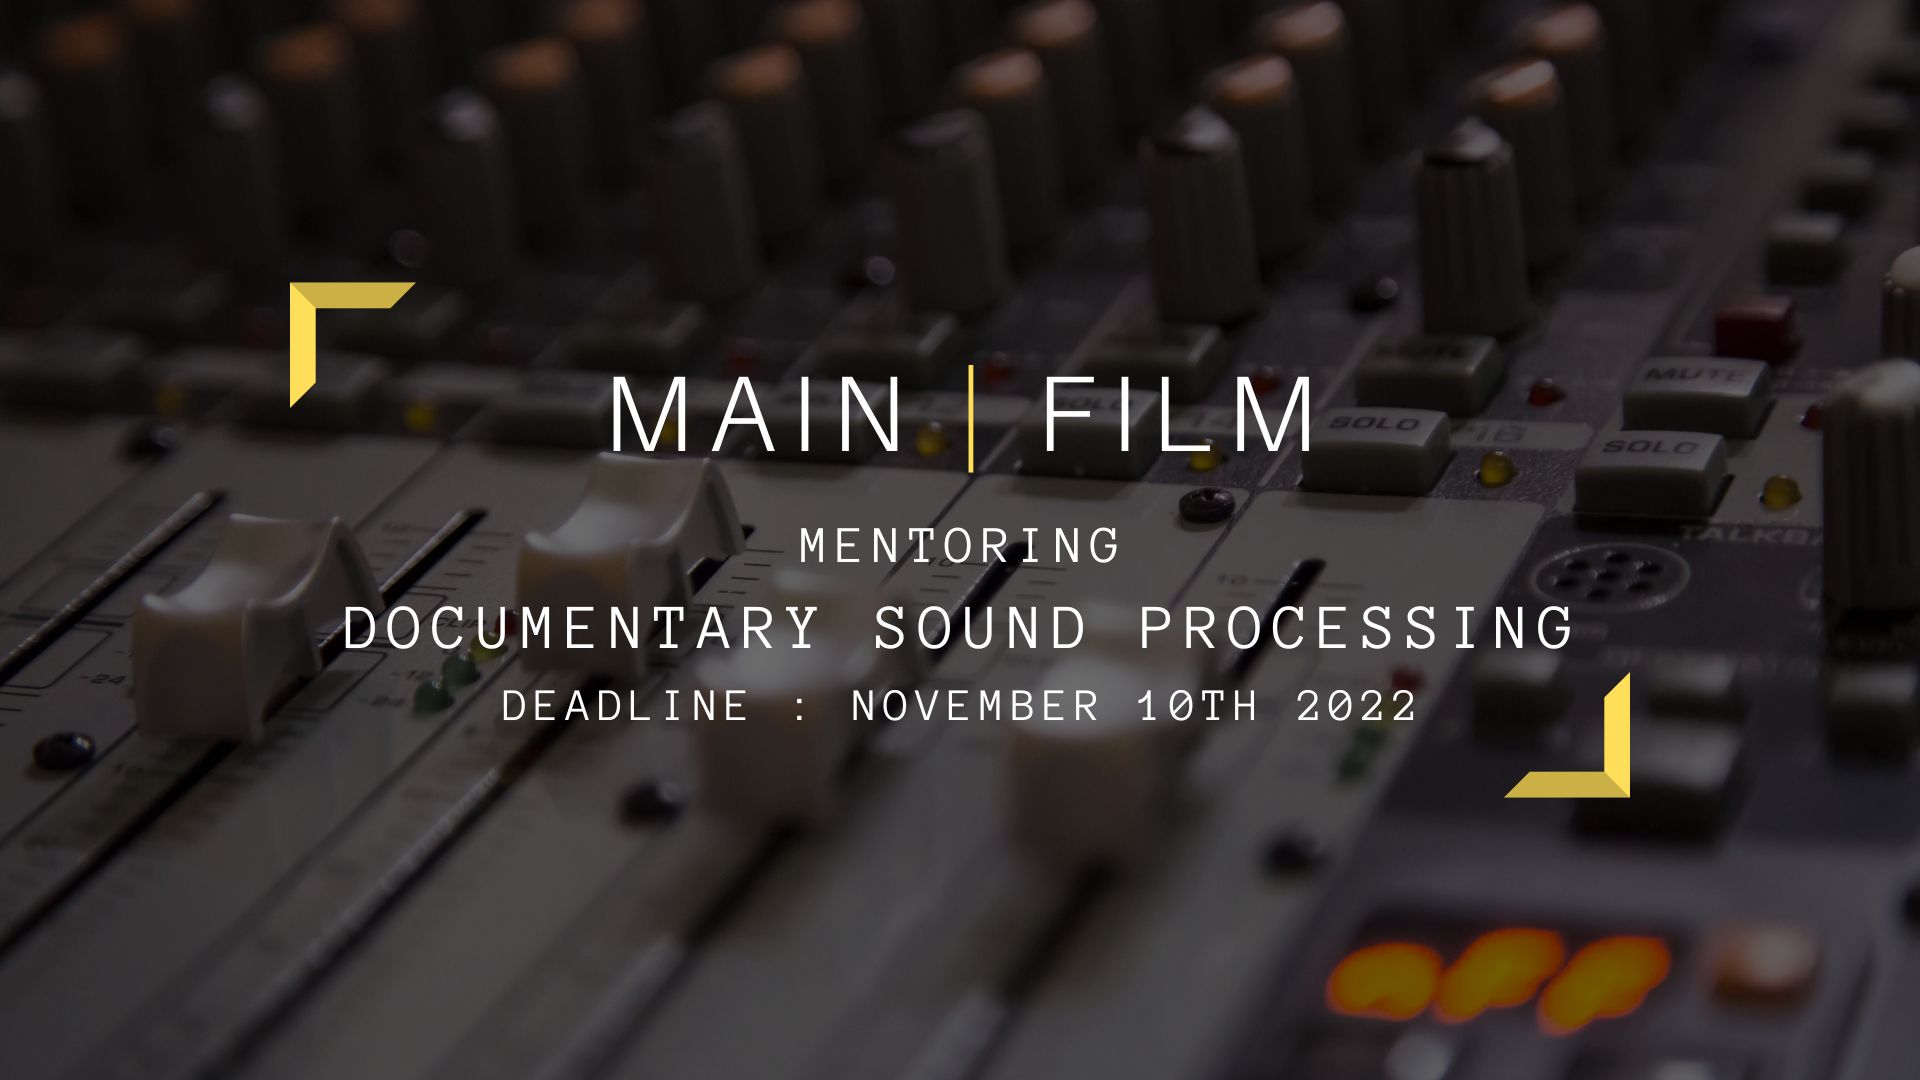 Mentoring application : Documentary sound processing | Online